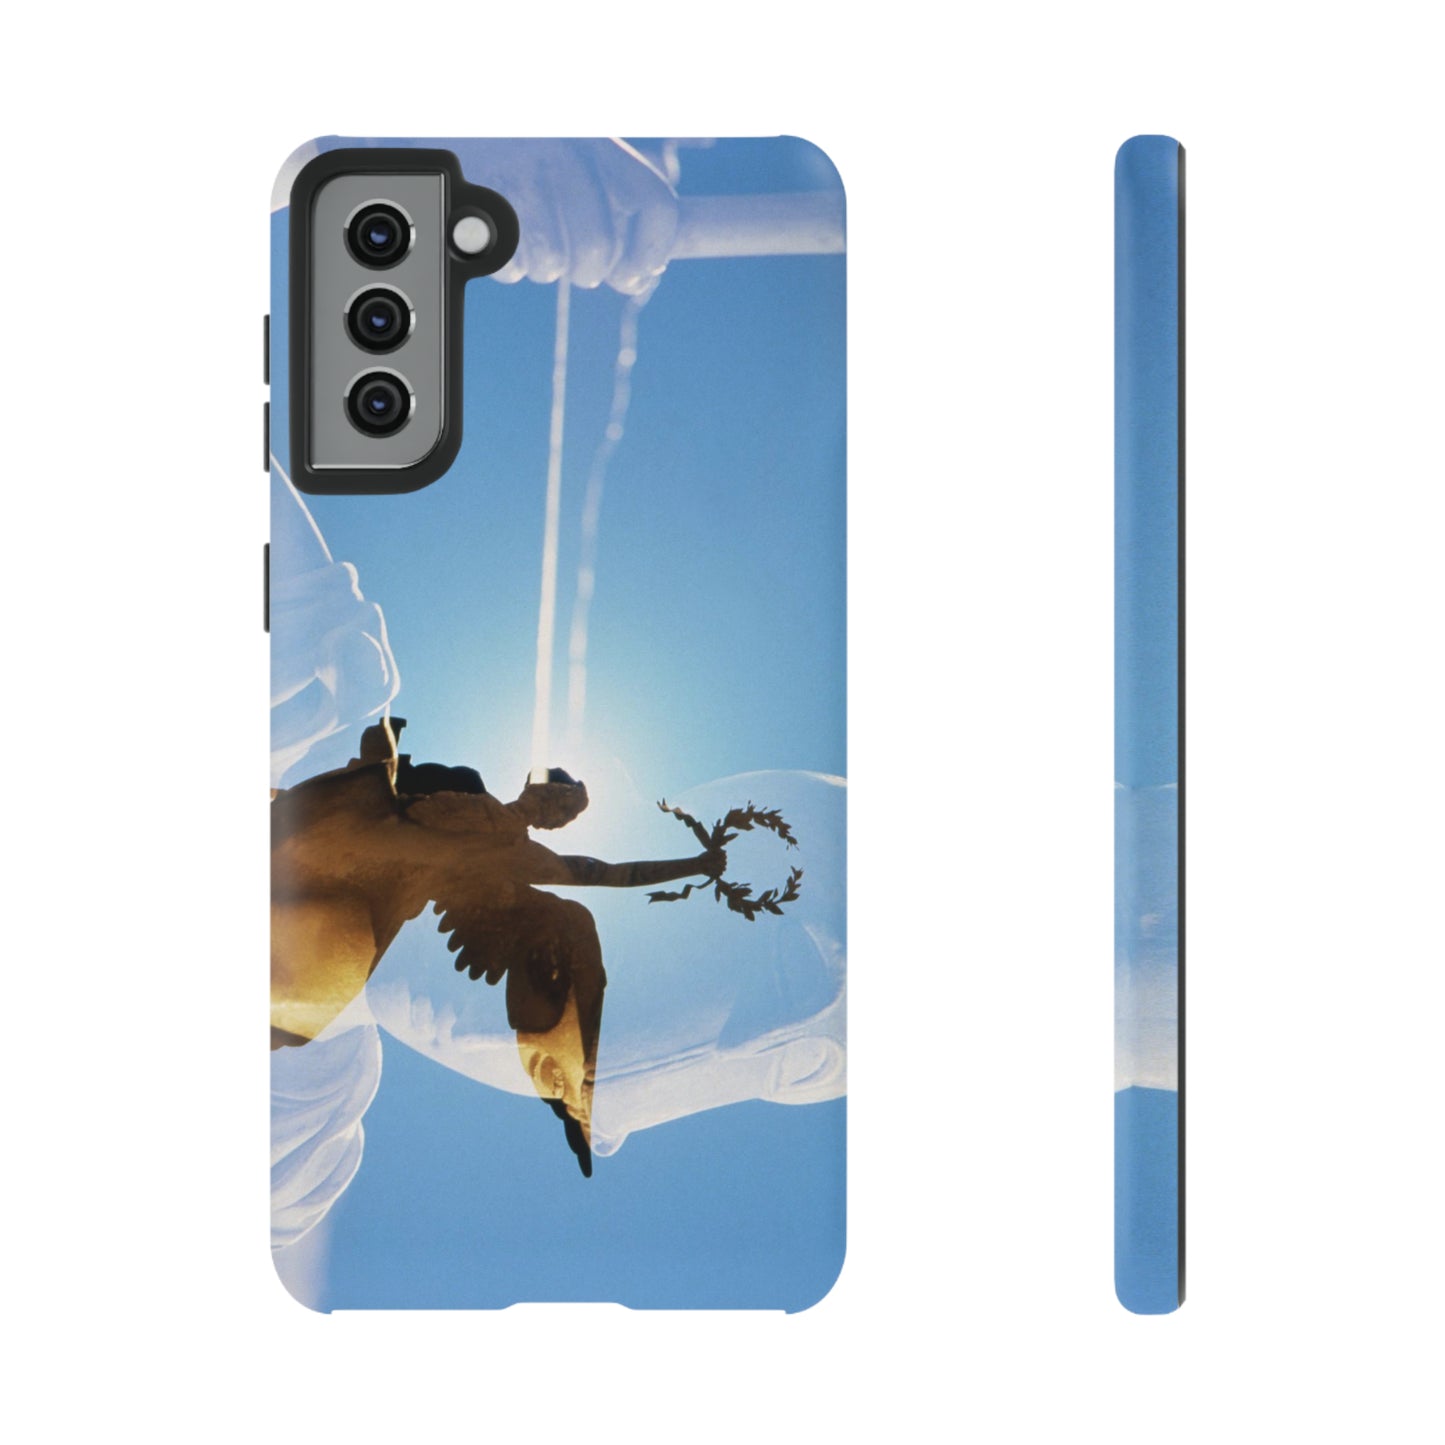 The Victory Phone Cases